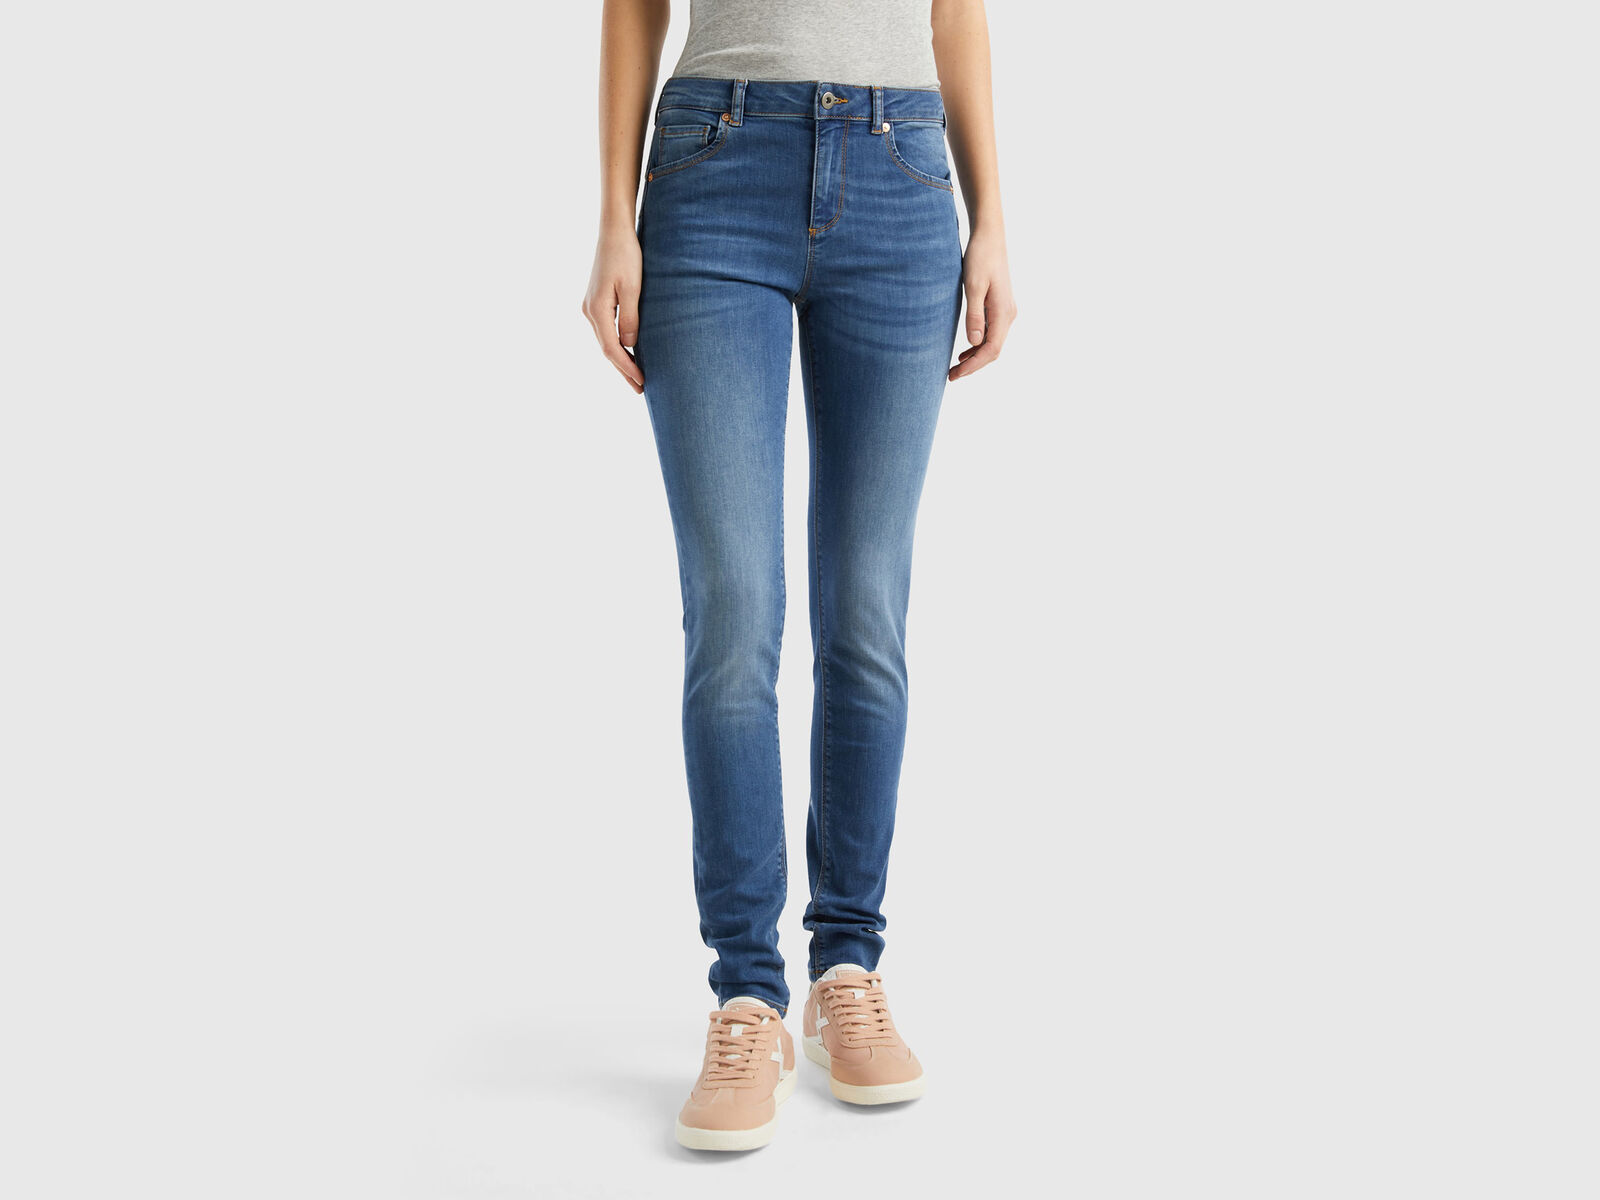 Skinny fit push up jeans - Blue